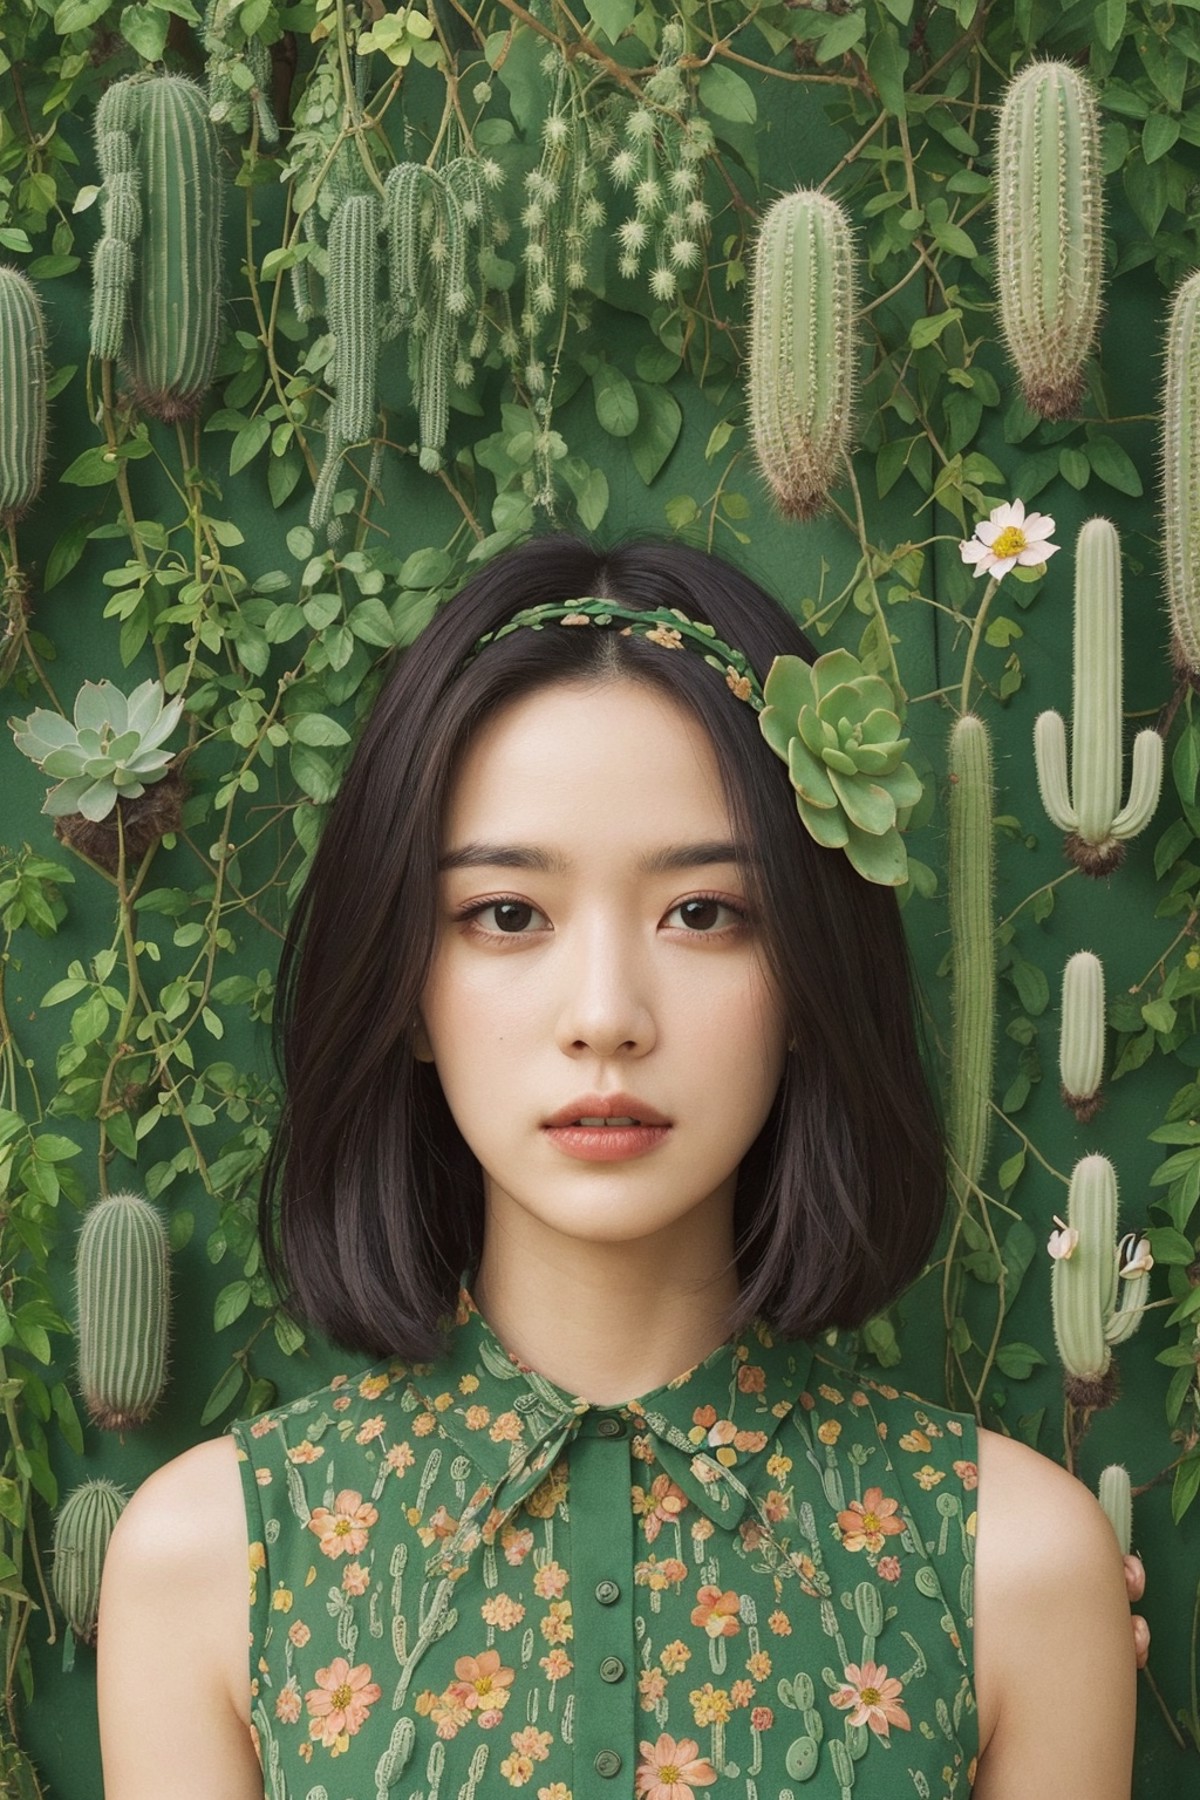 The portrait shows a woman wearing a green dress adorned with cactus-shaped patterns. She is surrounded by a collection of...